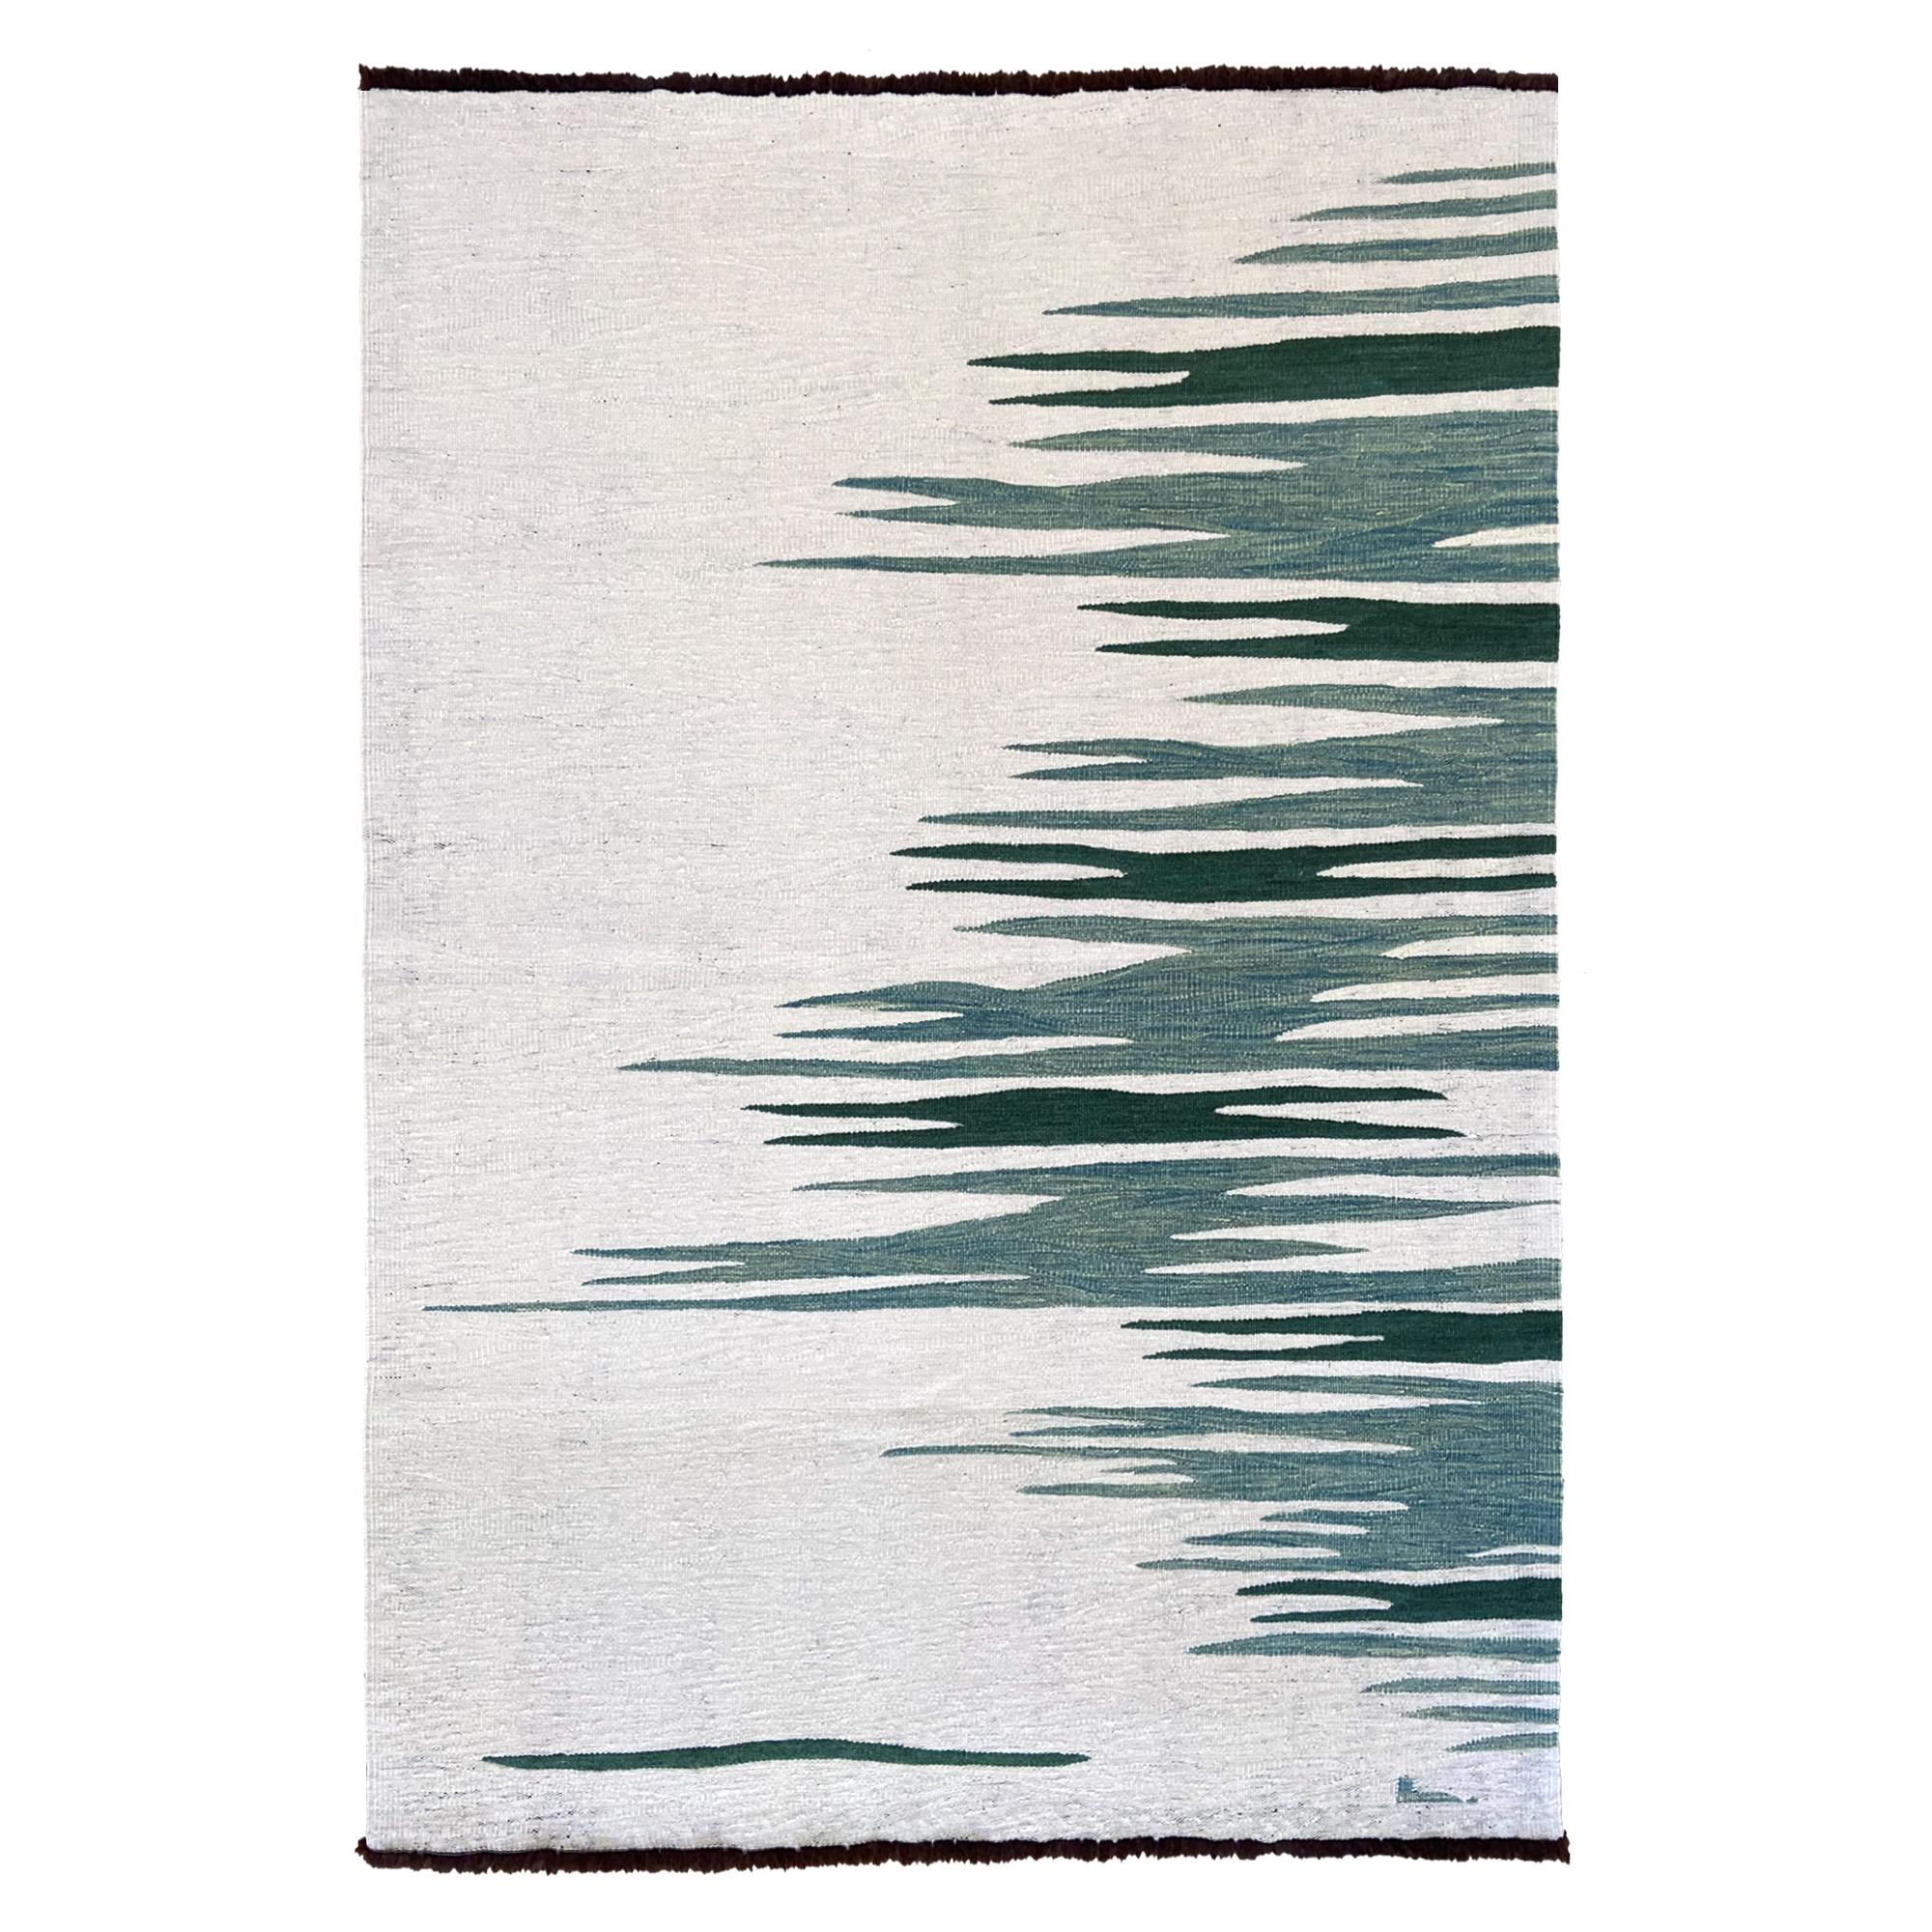 Ege No 2 Contemporary Modern Kilim Rug, Wool Handwoven Dune White and Green For Sale